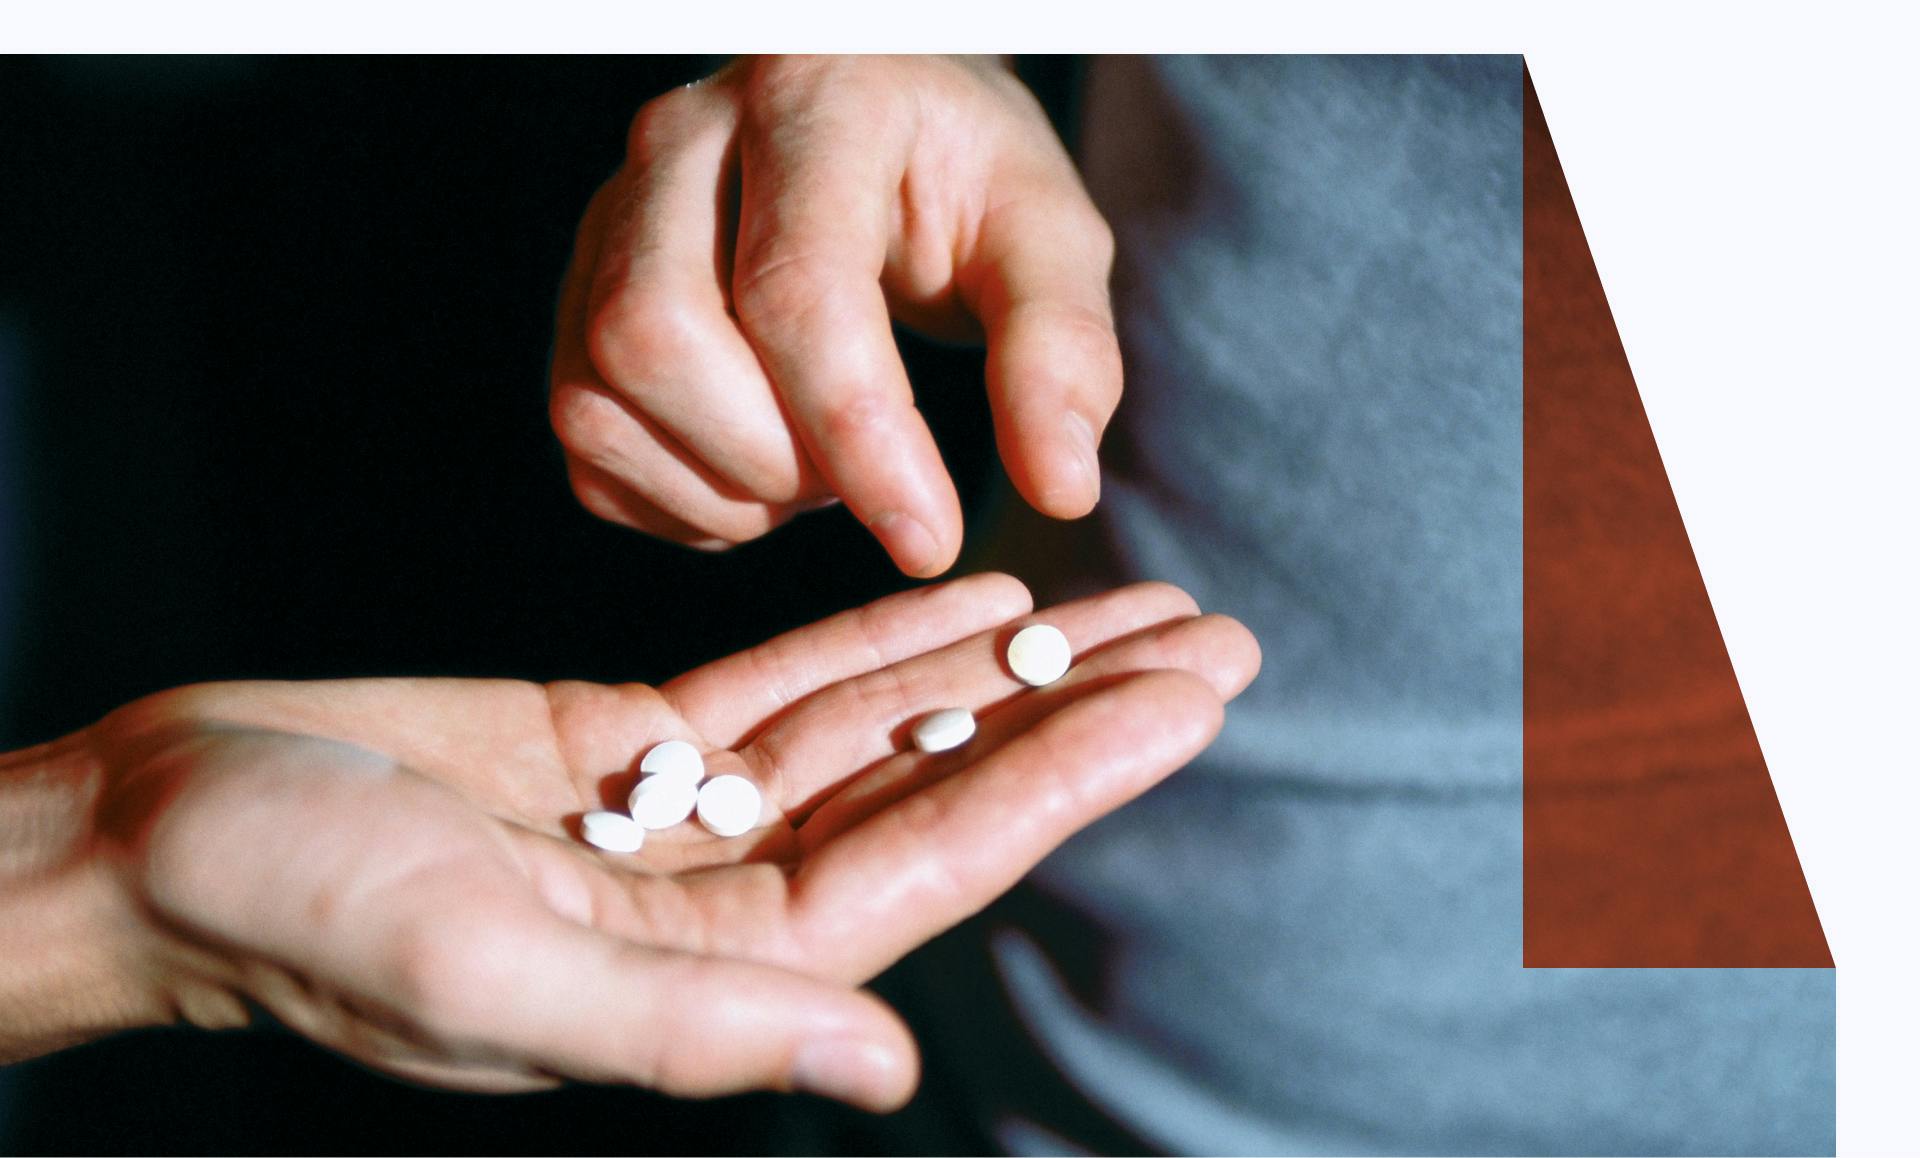 Male hand holding recreational drugs - stock photo